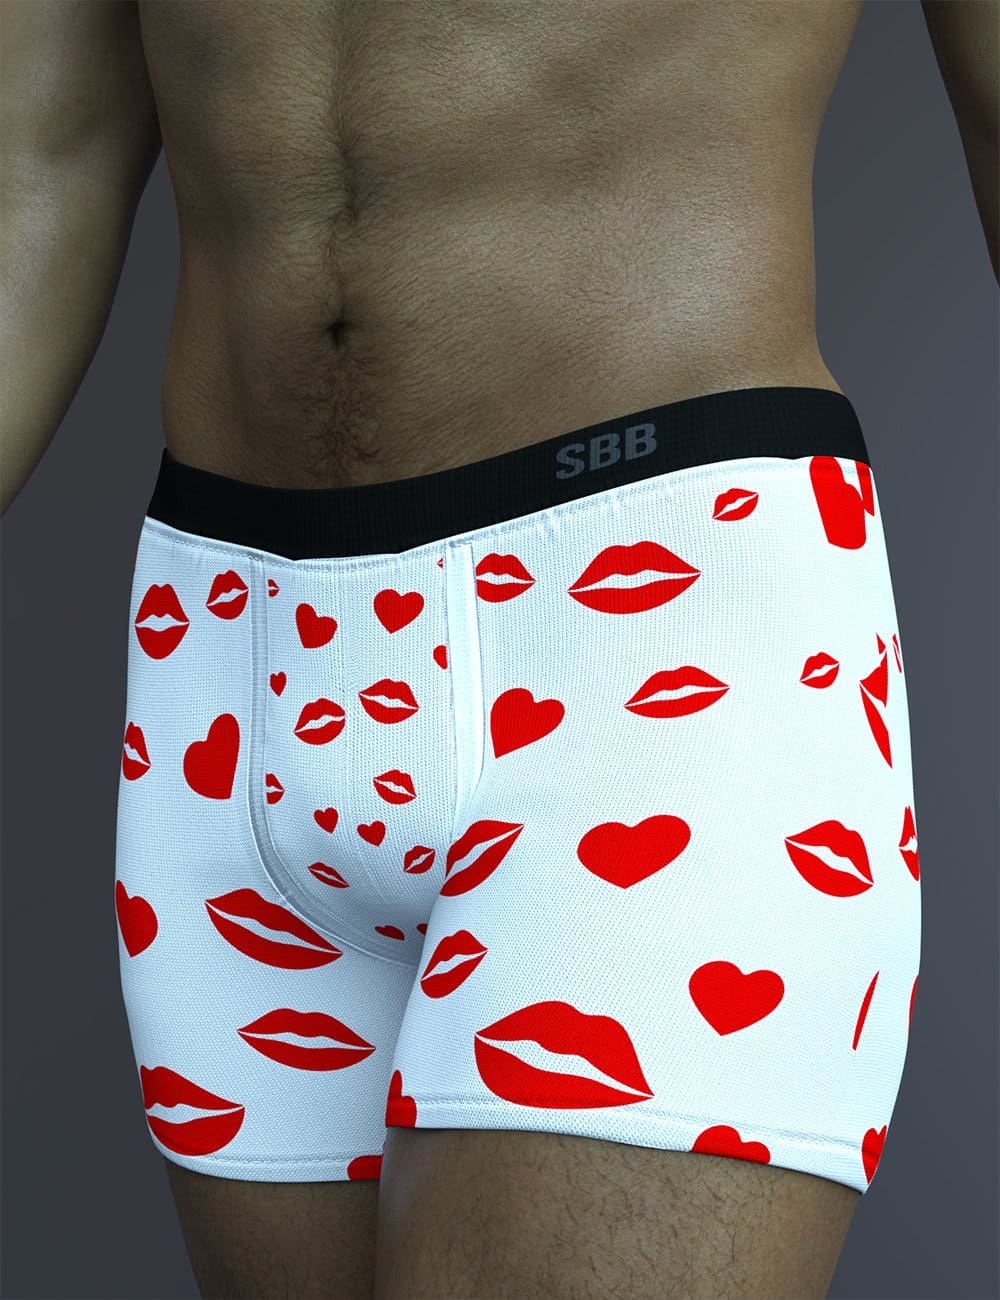 X-Fashion Sexy Boxers Briefs for Genesis 8 and 8.1 Male_DAZ3D下载站